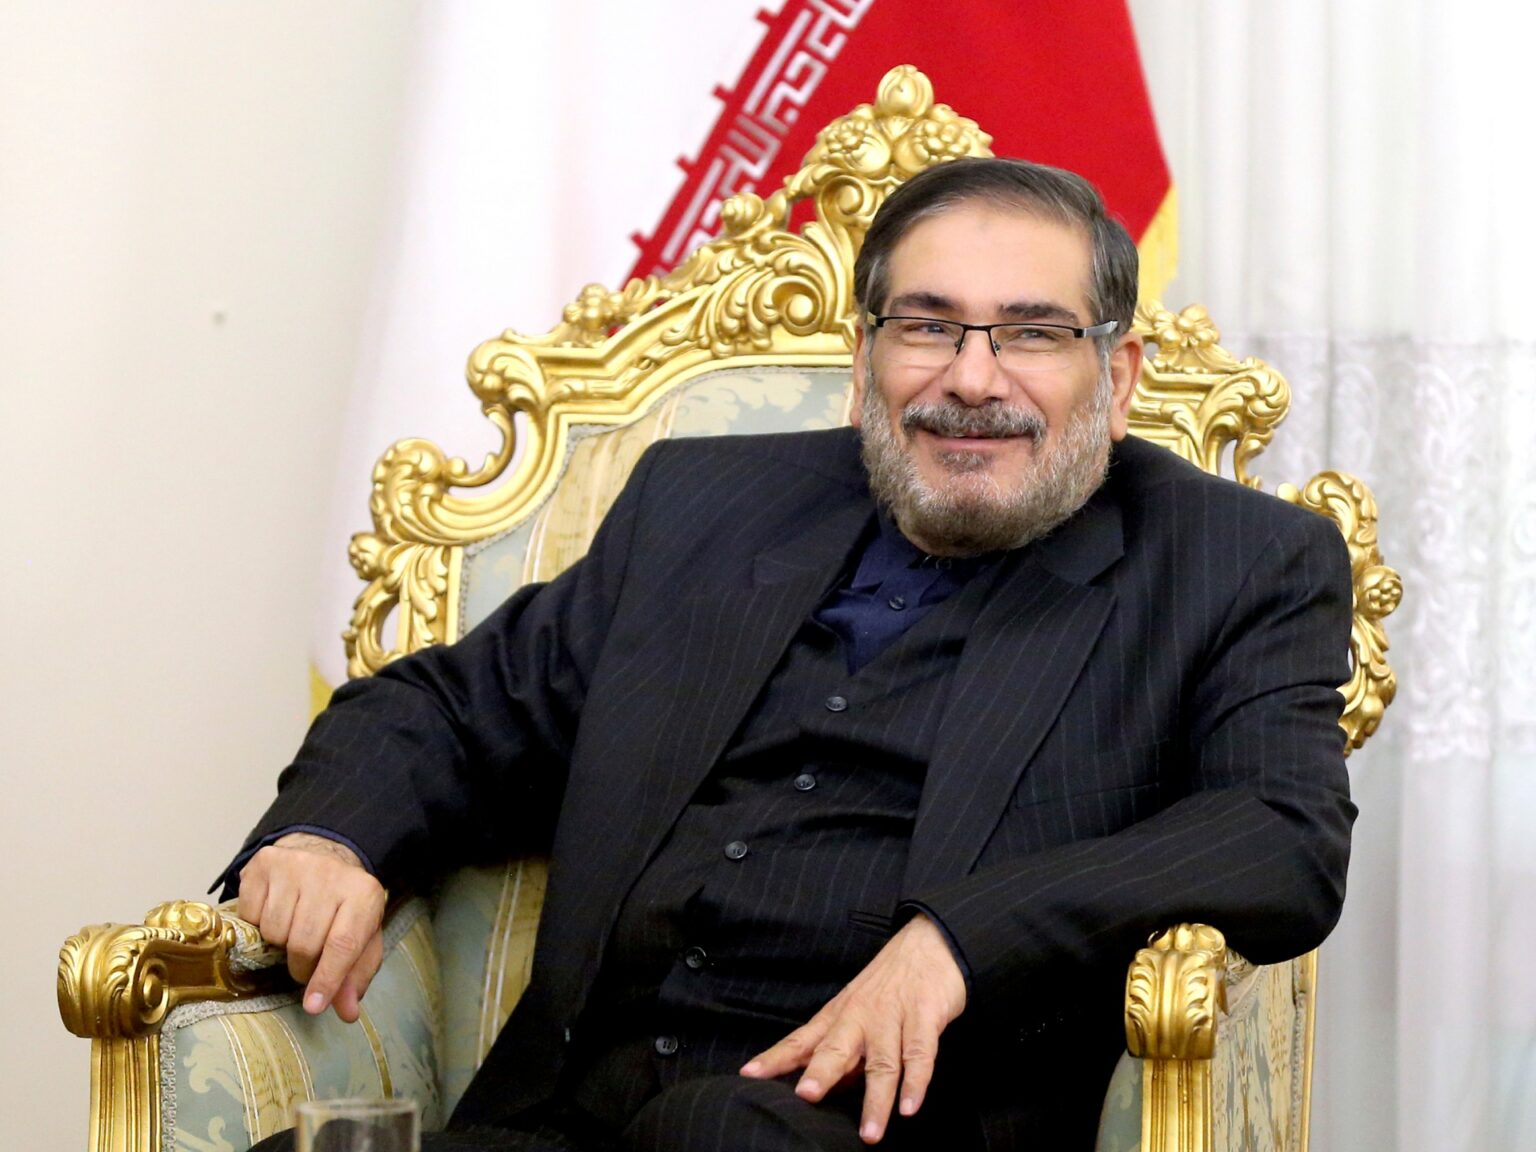 Iran’s security chief Shamkhani was subsequently replaced